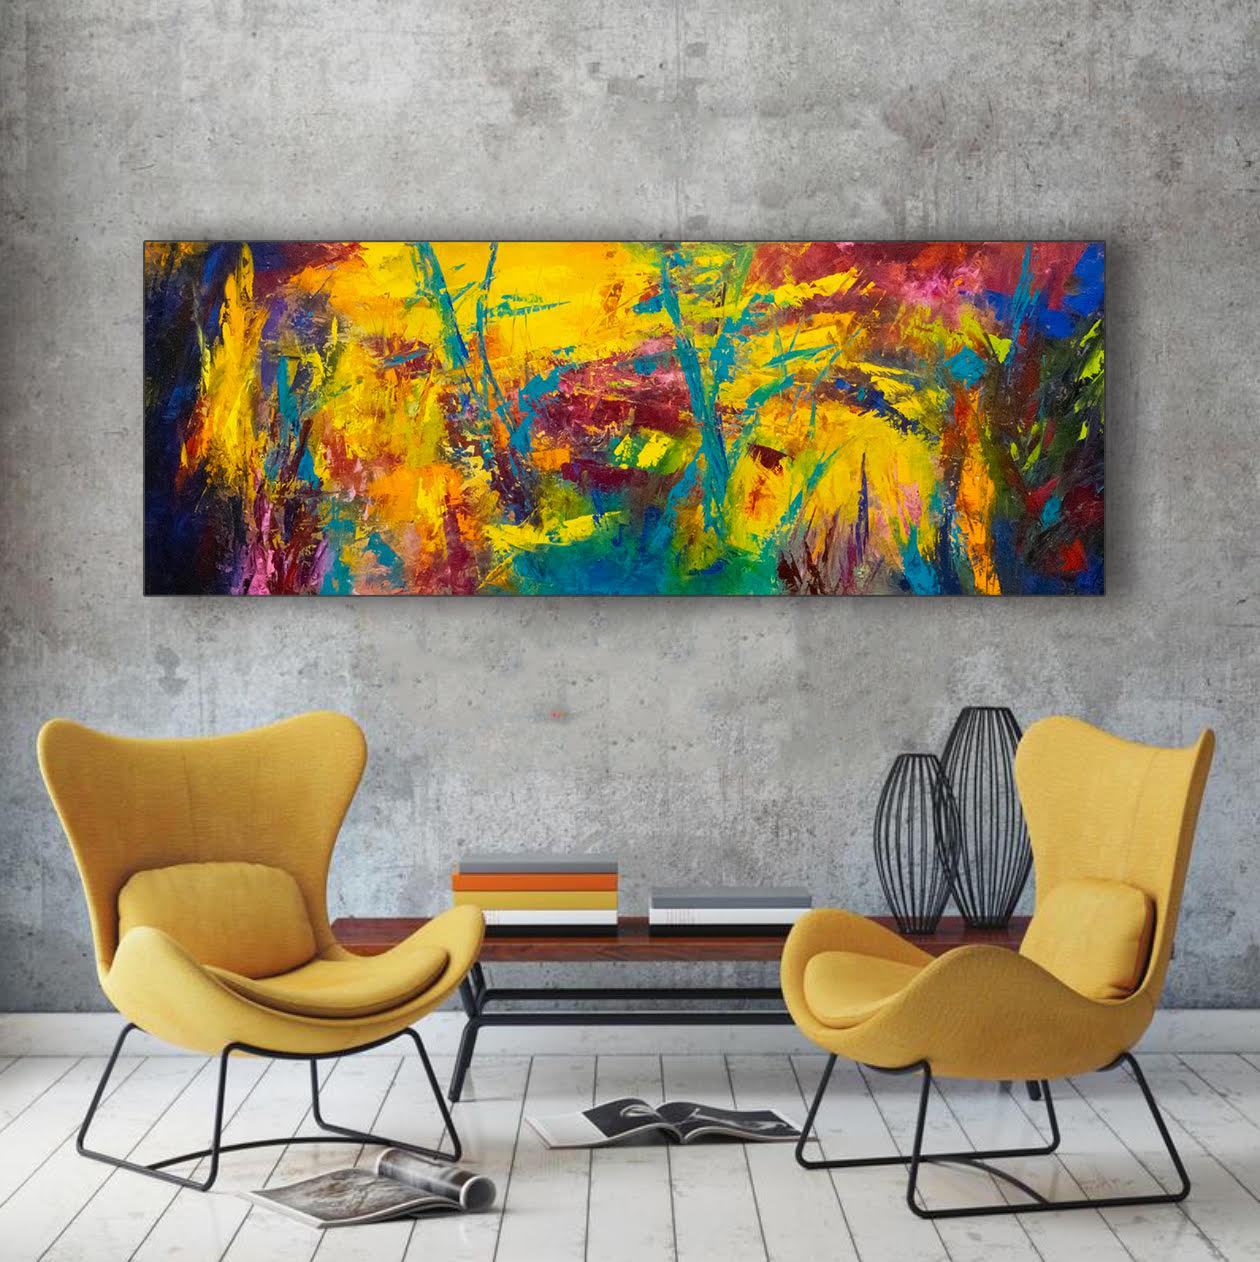 Caribbean Rhapsody - colors of the Caribbean create energy and movement - Painting by Aleta Pippin